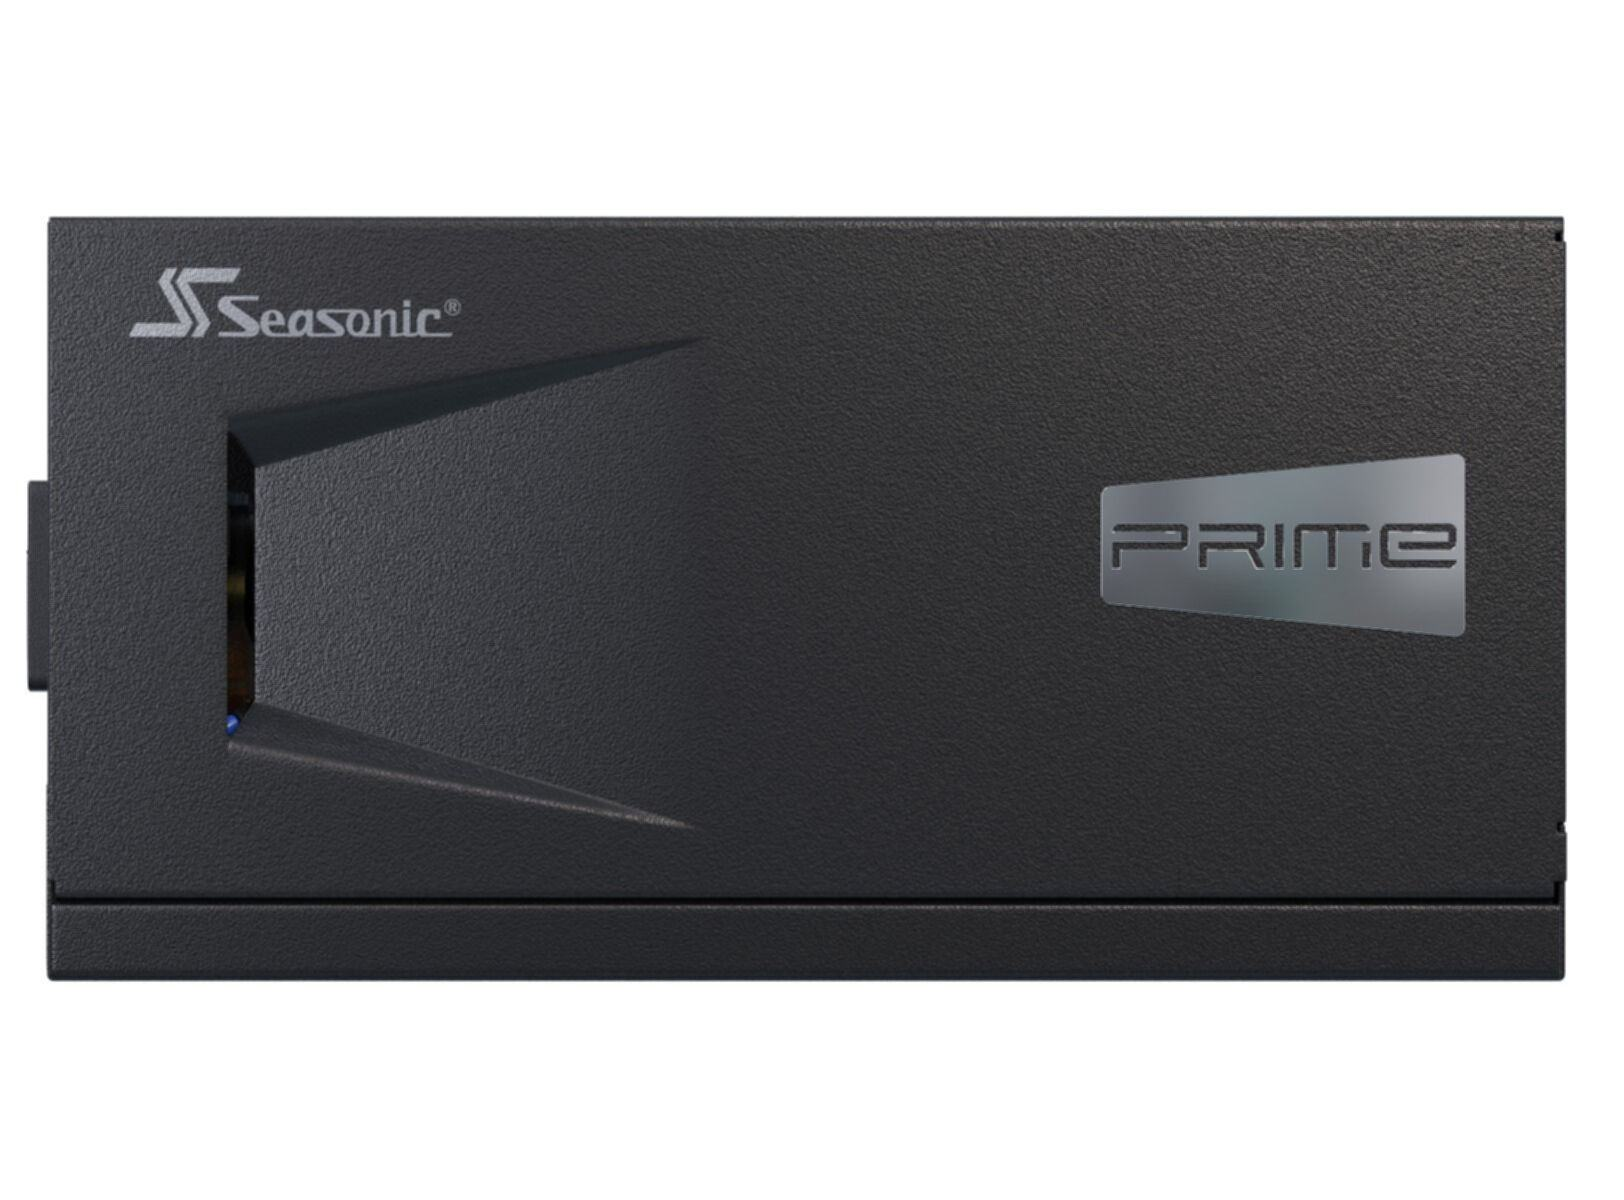 SEASONIC Prime PX-850 PC (ErP) Netzteil 850 CB, CCC, BSMI, Products RoHS, Energy-Related 6, EAC Watt Lot WEEE, REACH, cULus, TUV